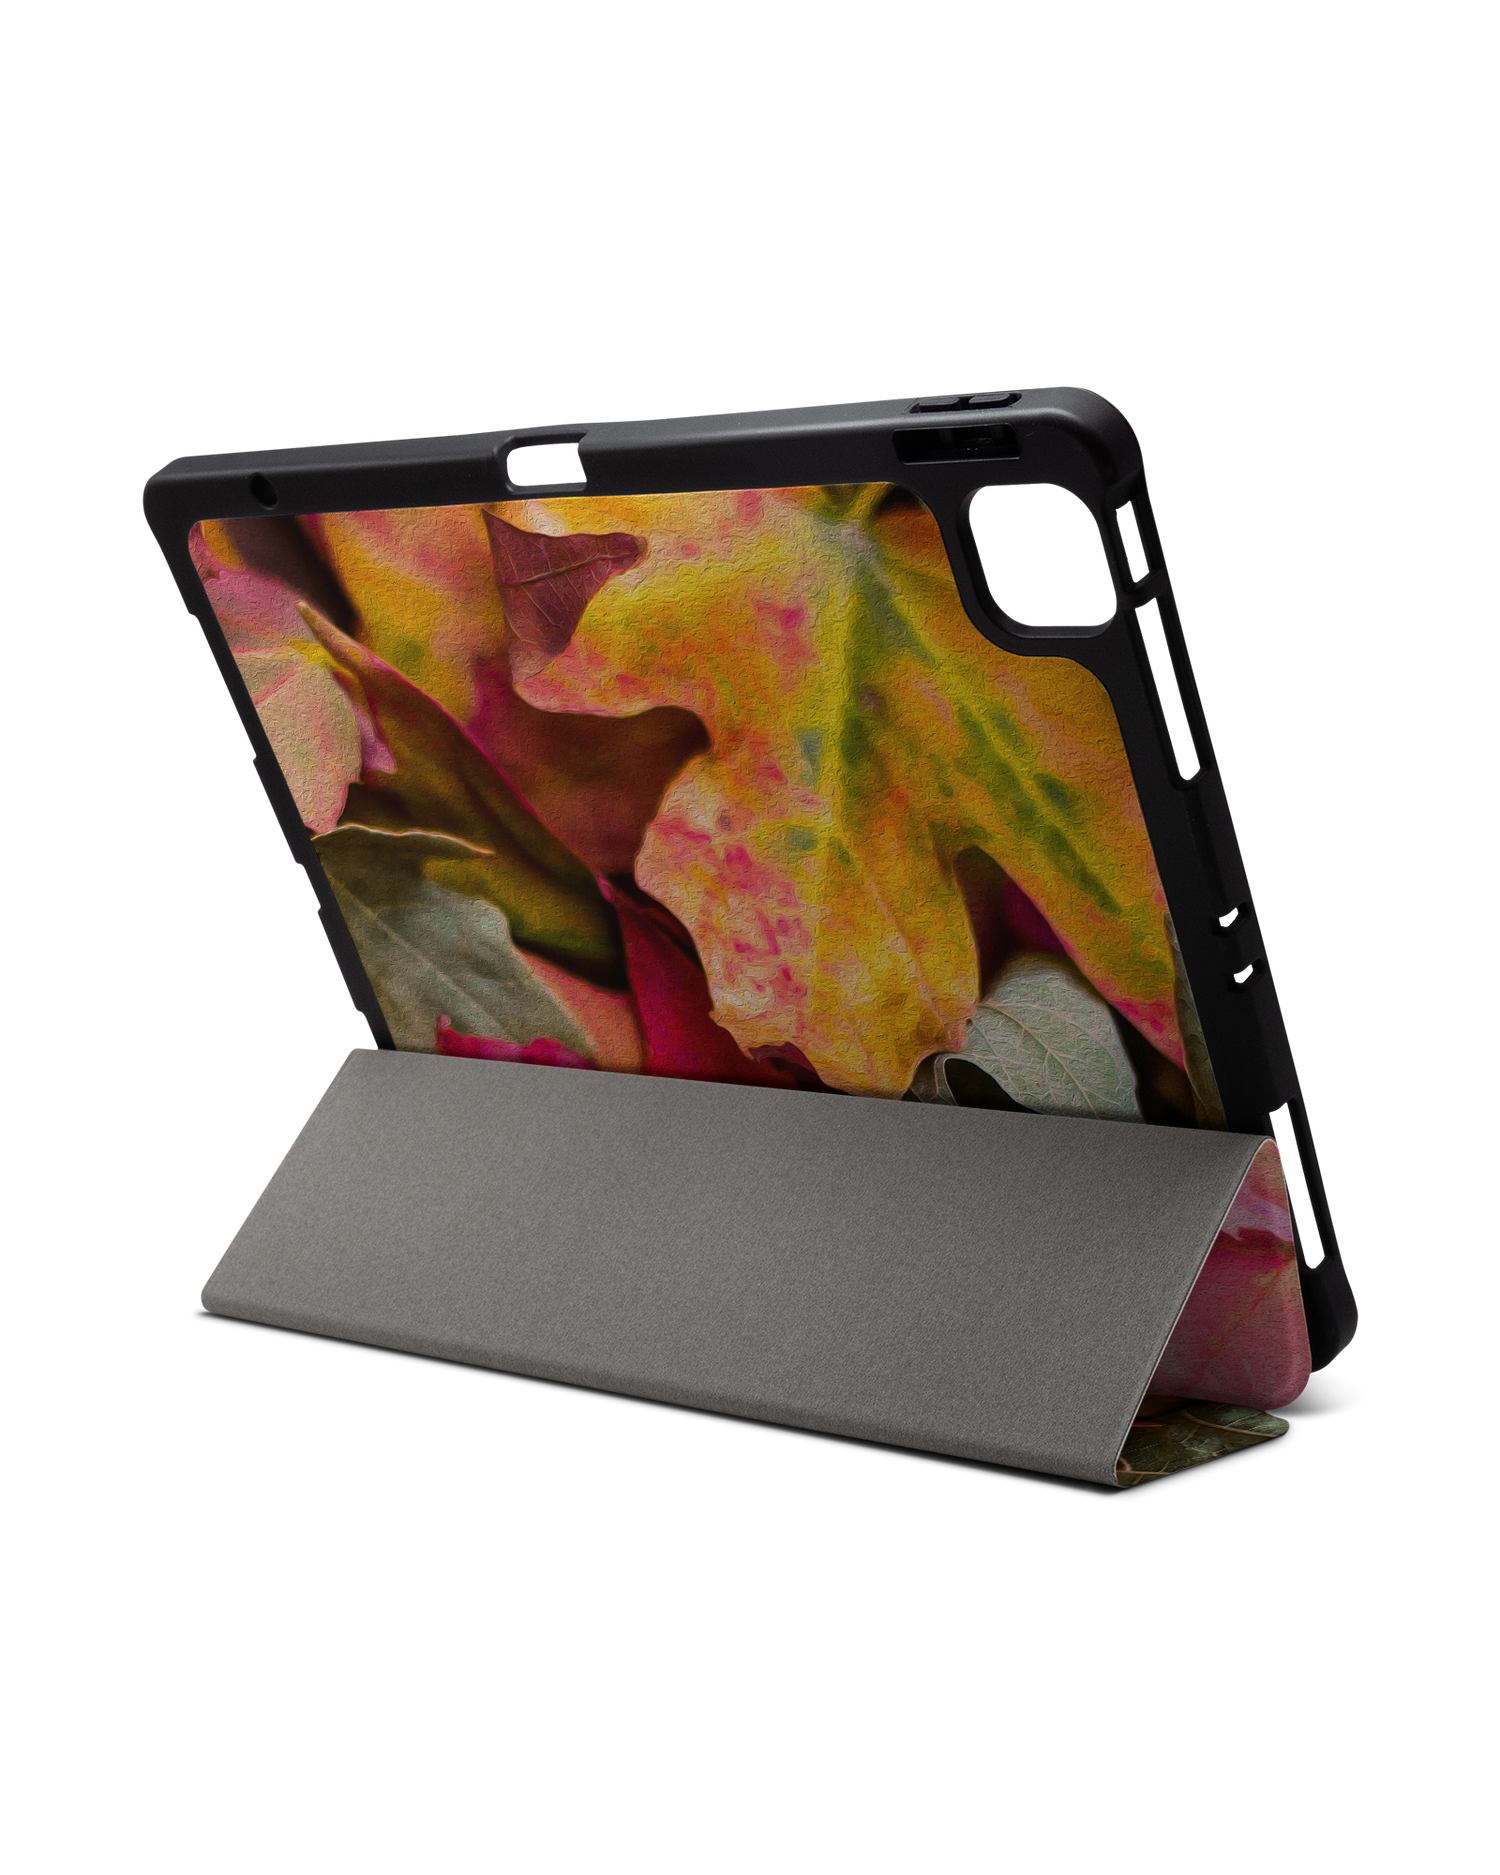 Autumn Leaves iPad Case with Pencil Holder for Apple iPad Pro 6 12.9